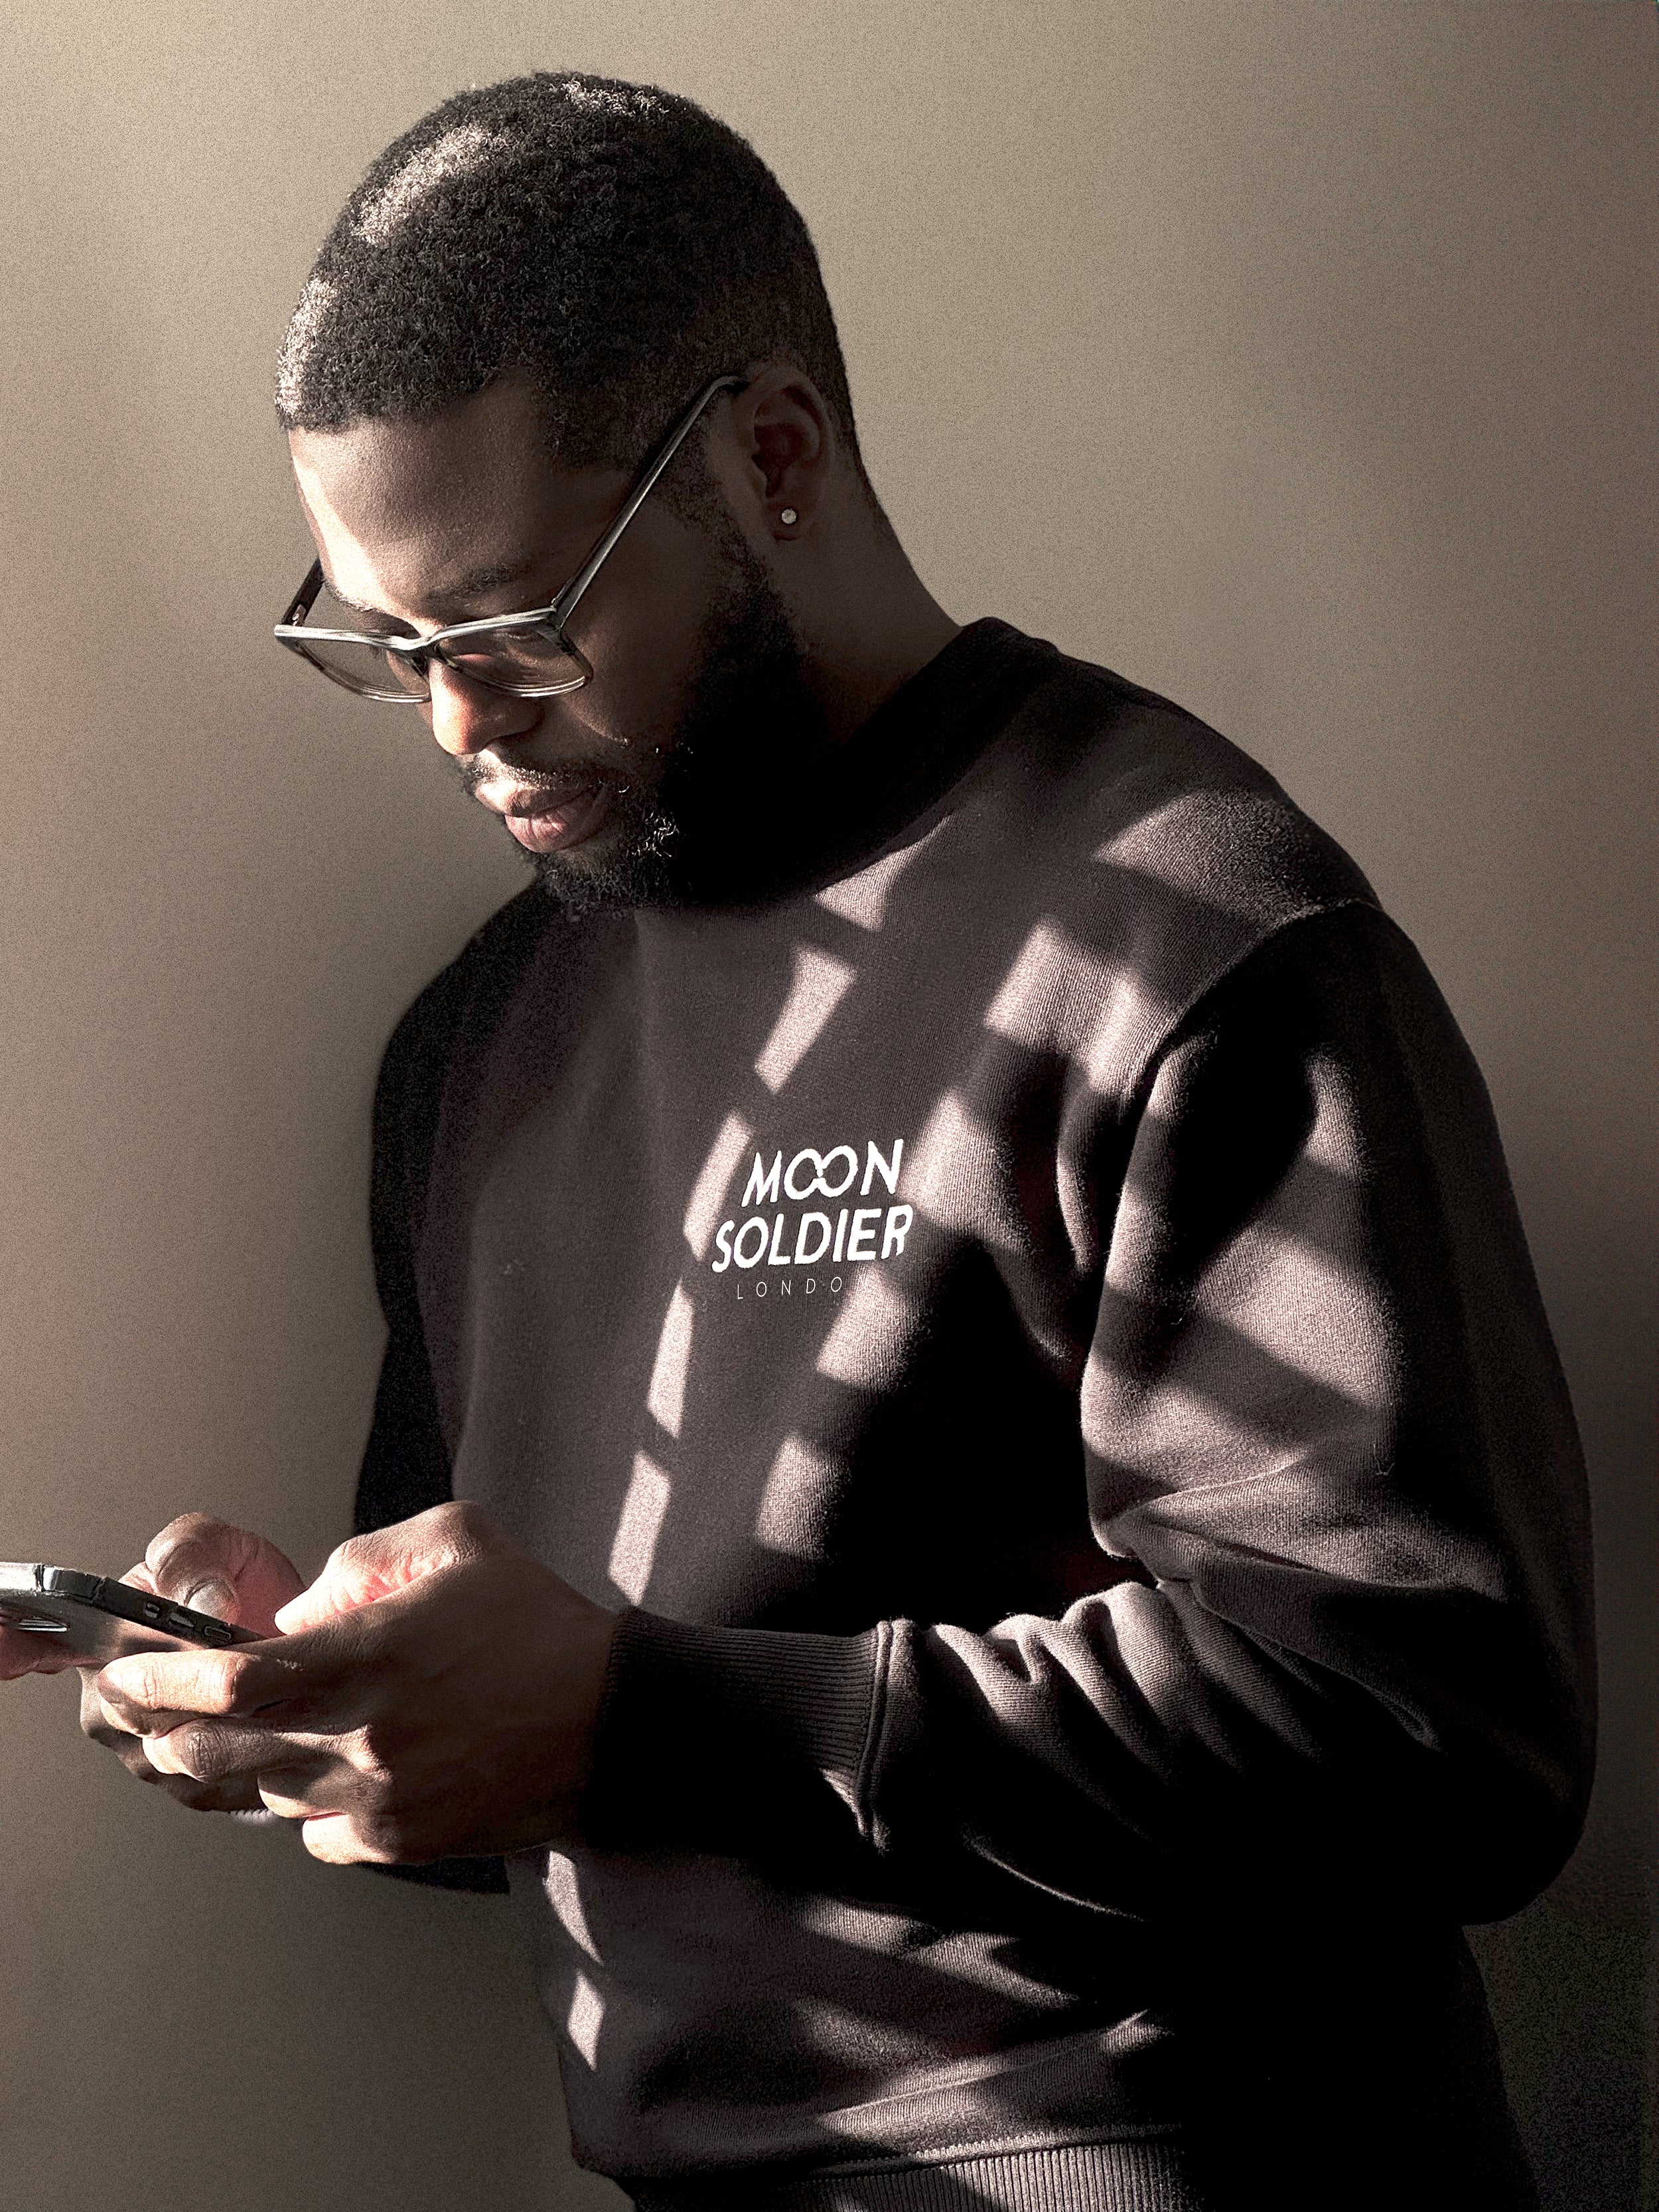 Header image showing a young African American male in glasses, focused on his phone in hand. He's wearing a black Moon Soldier sweatshirt with the logo on the left chest. The background is a warm grey wall.